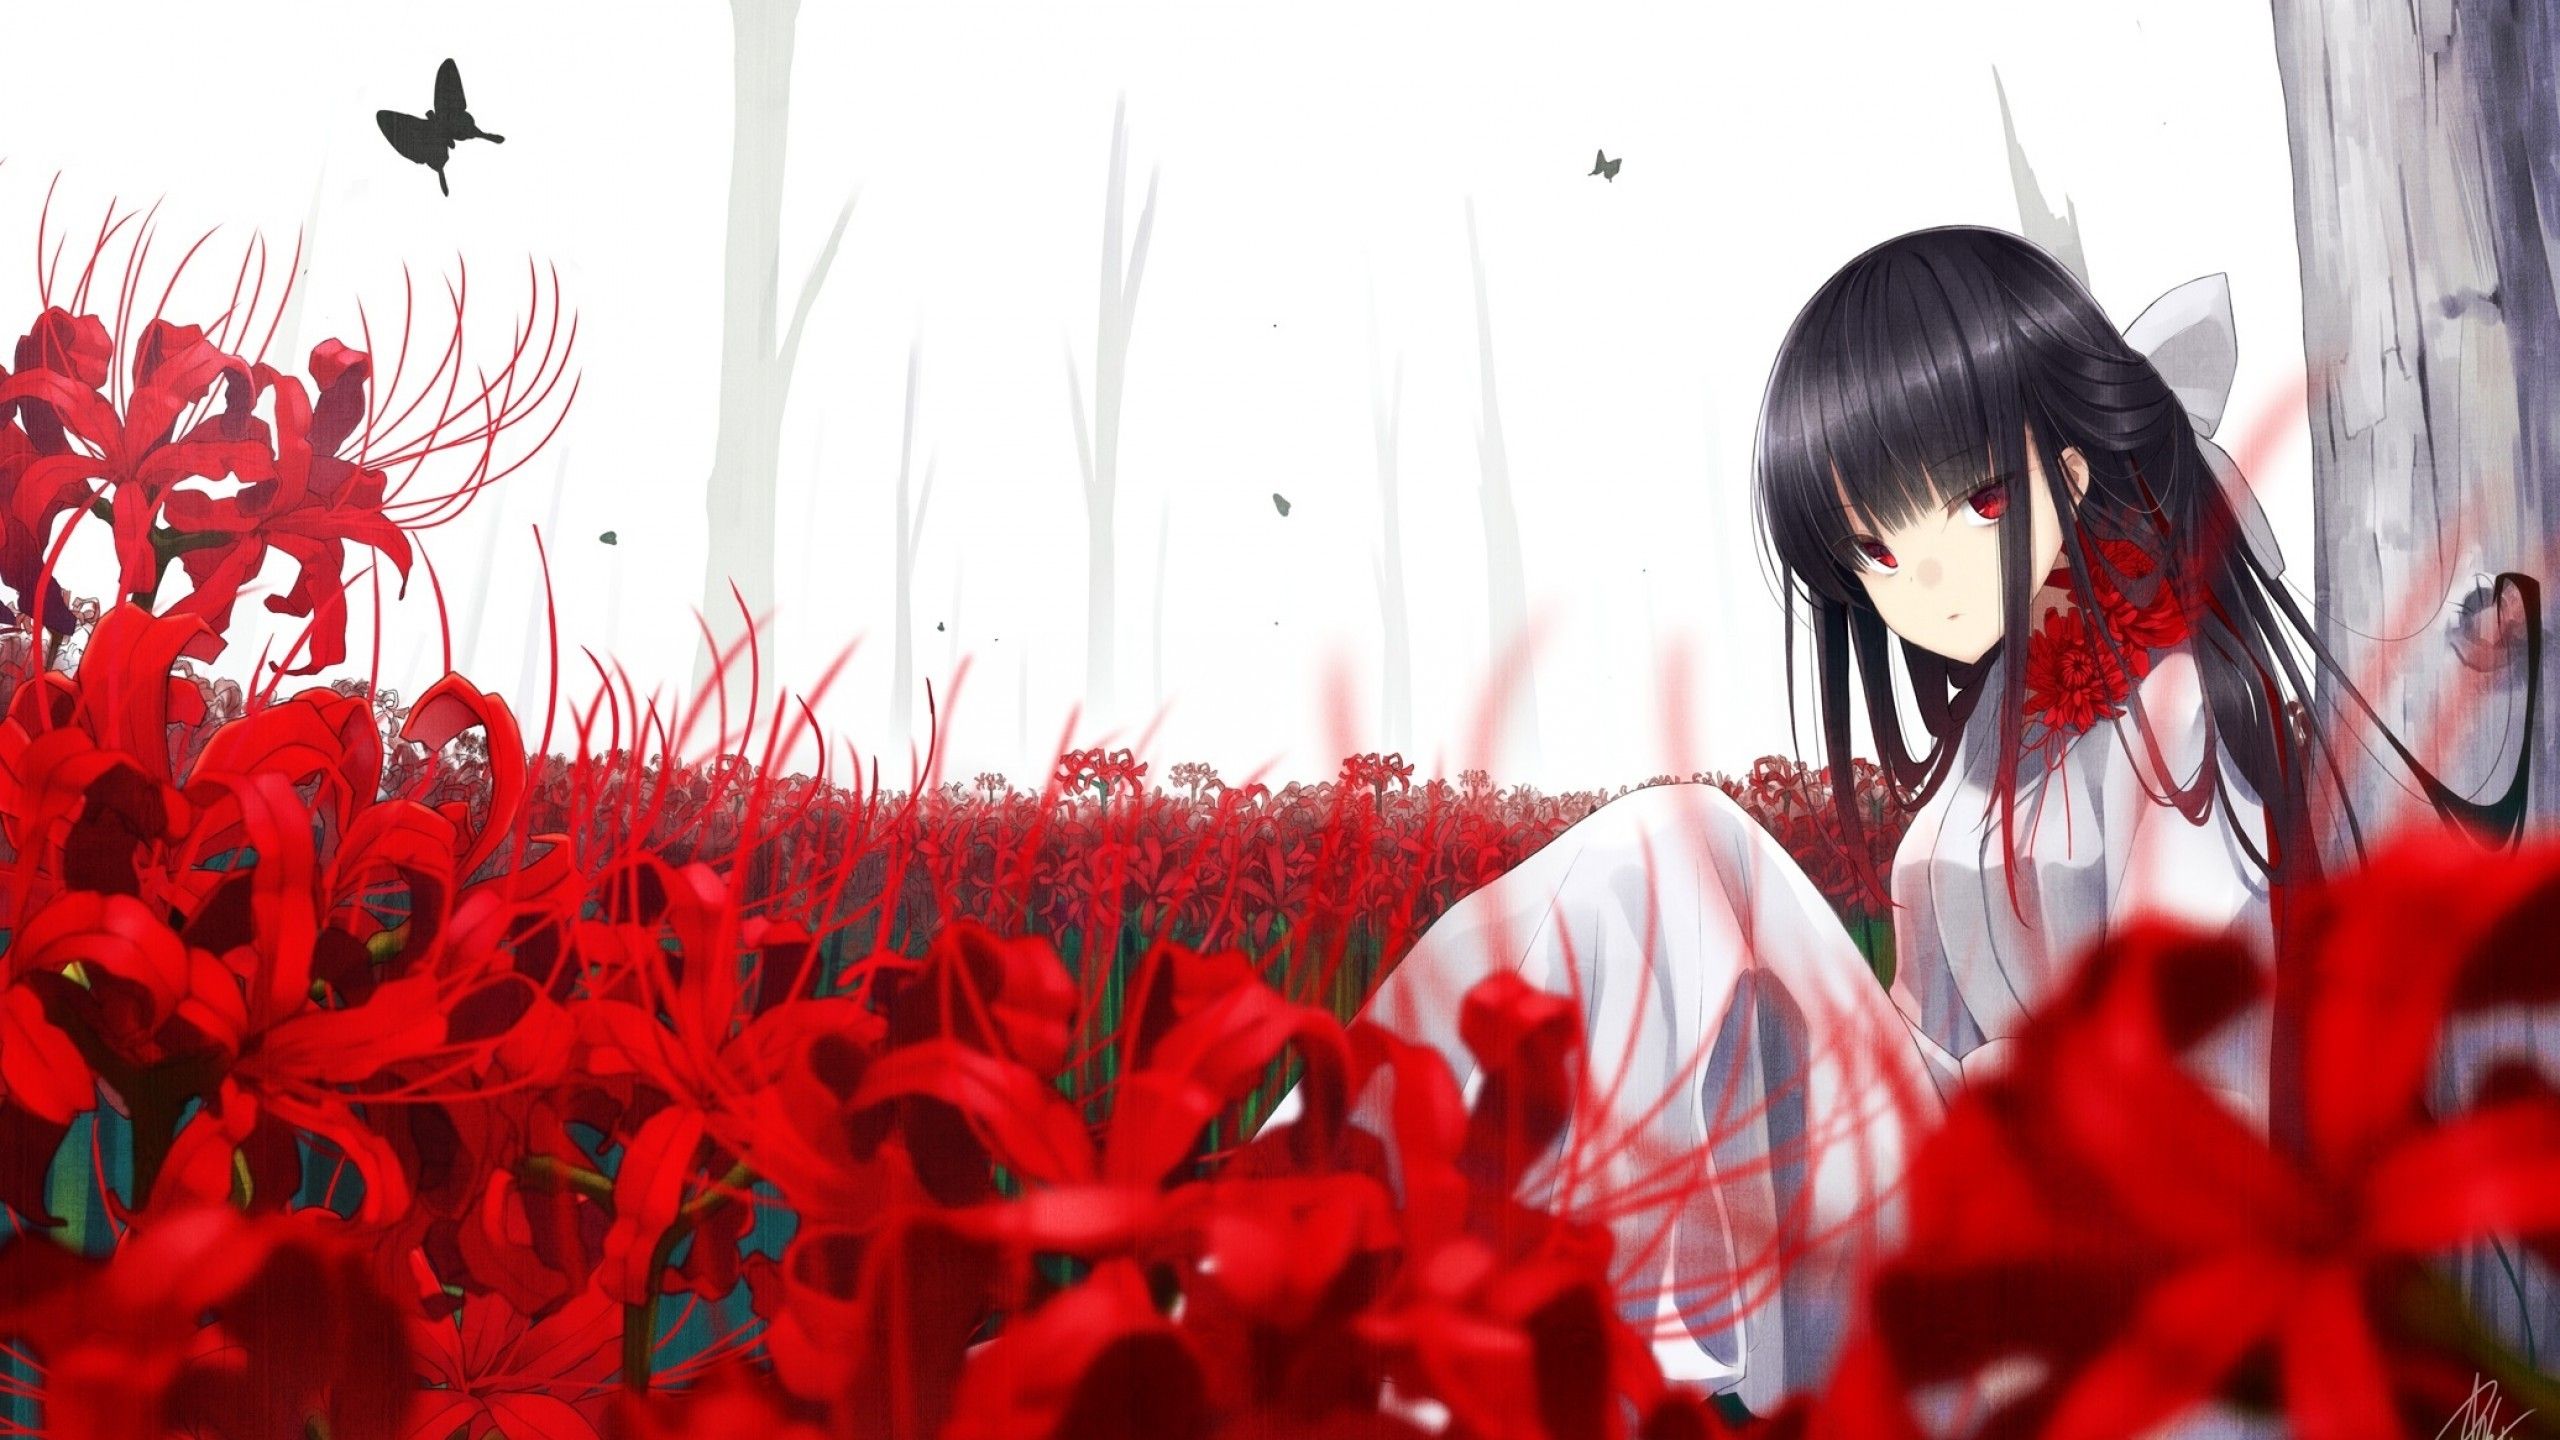 Download 2560x1440 Red Eyes, Anime Girl .wallpapermaiden.com